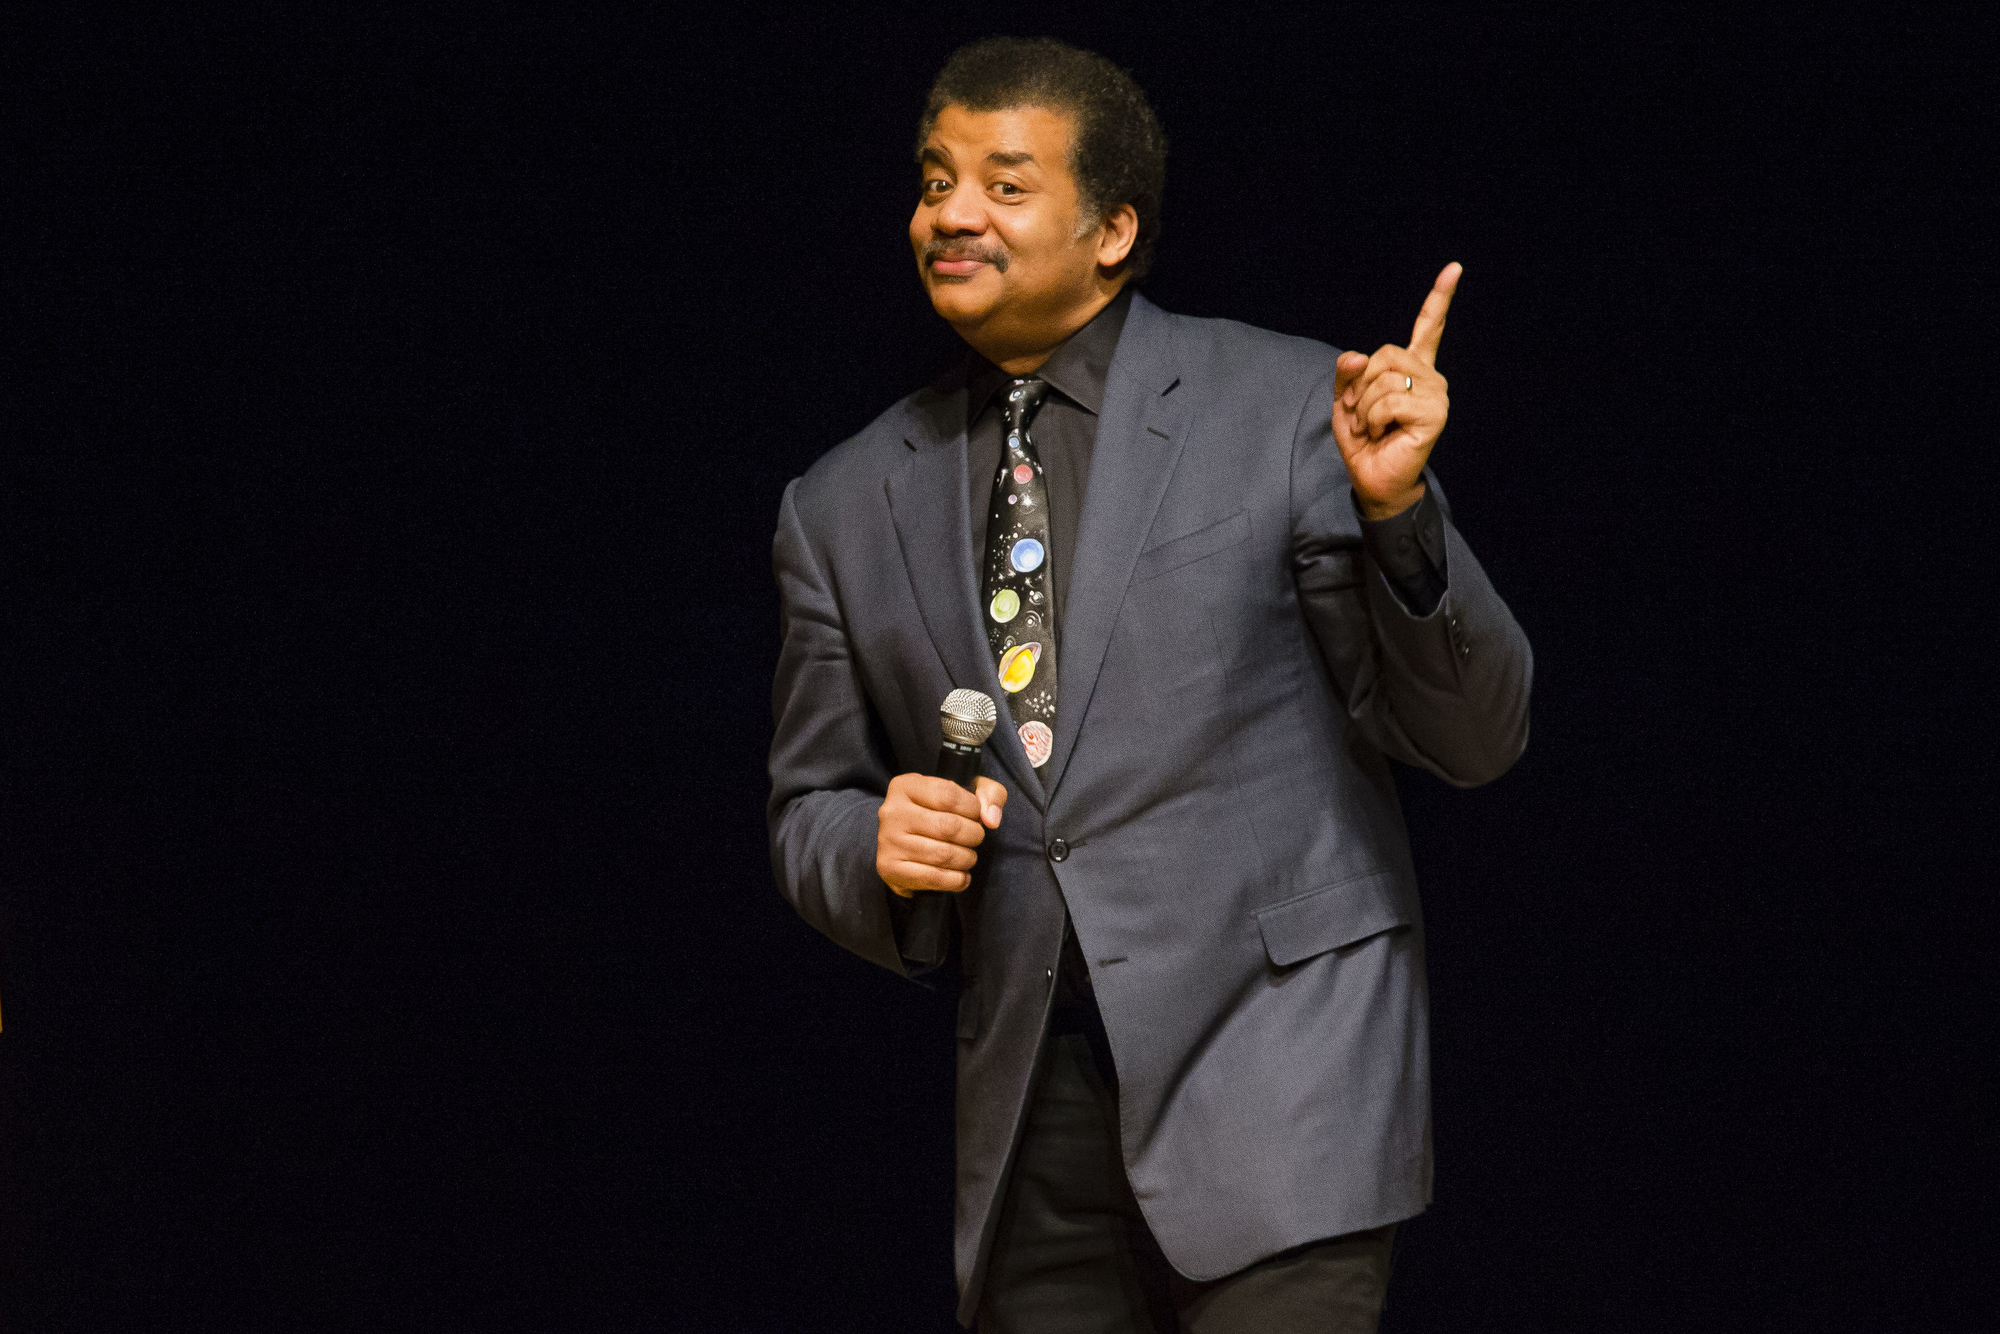 Neil deGrasse Tyson Bought His First Serious Telescope at Age 14 by Walking Dogs for 50 Cents Each